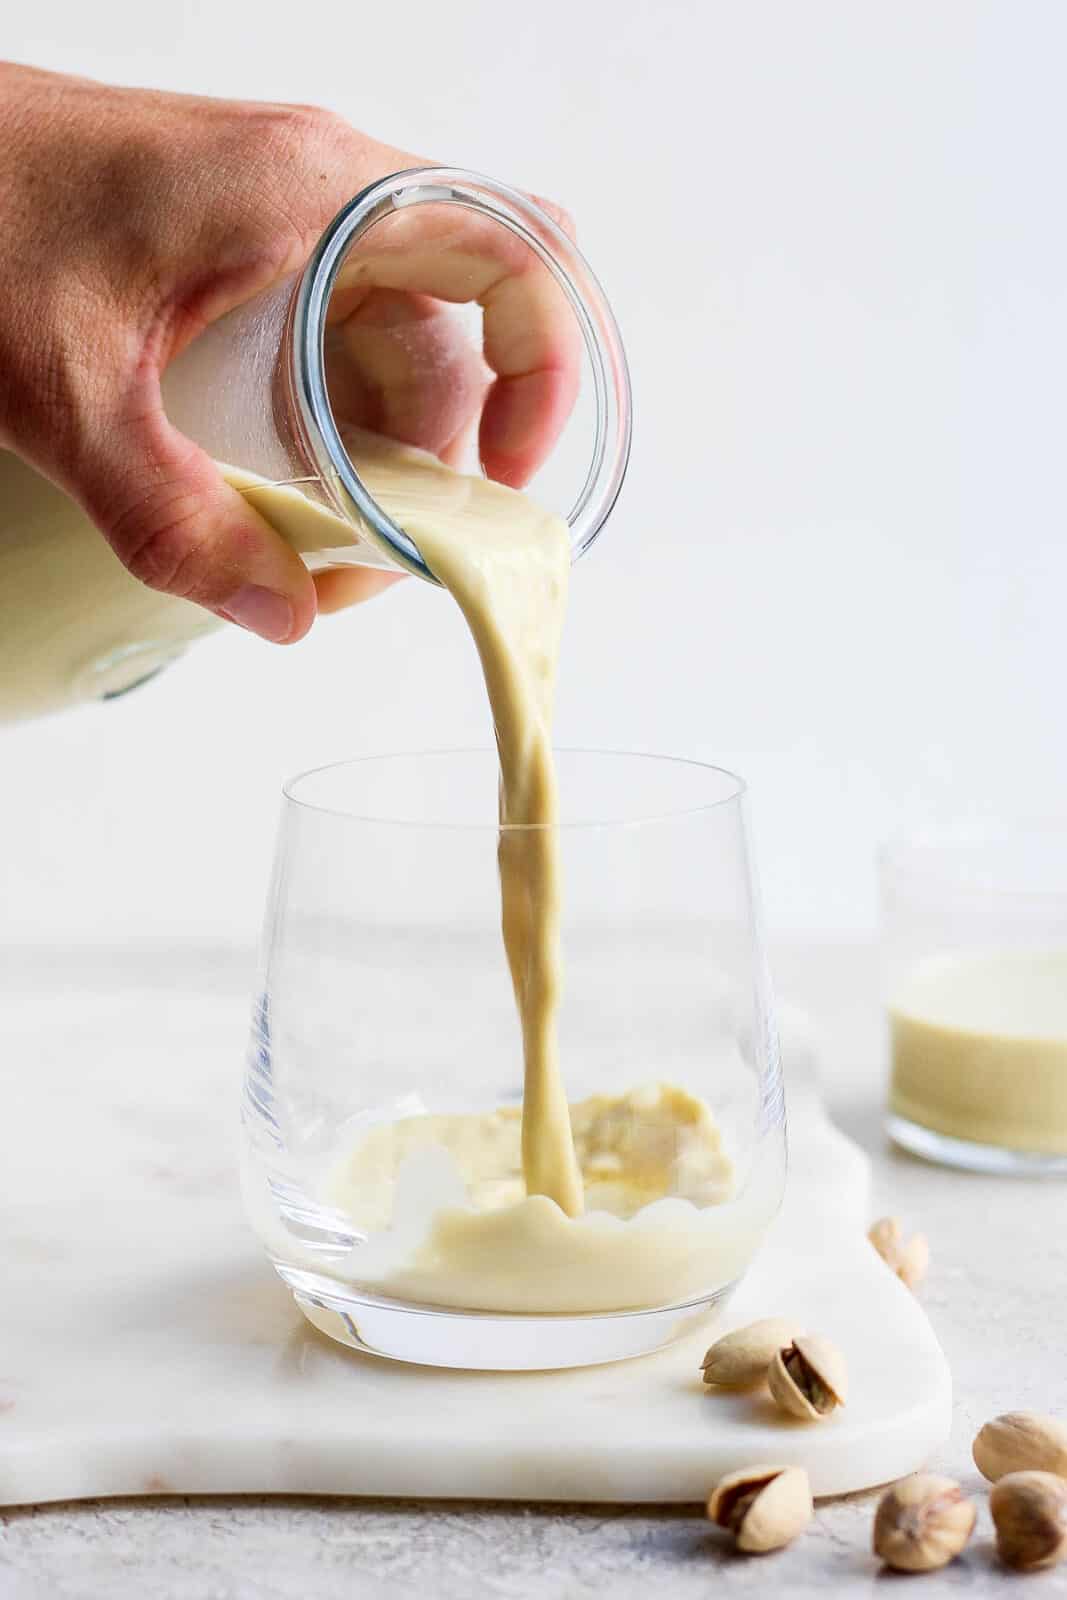 Pouring pistachio milk from a carafe into a glass.